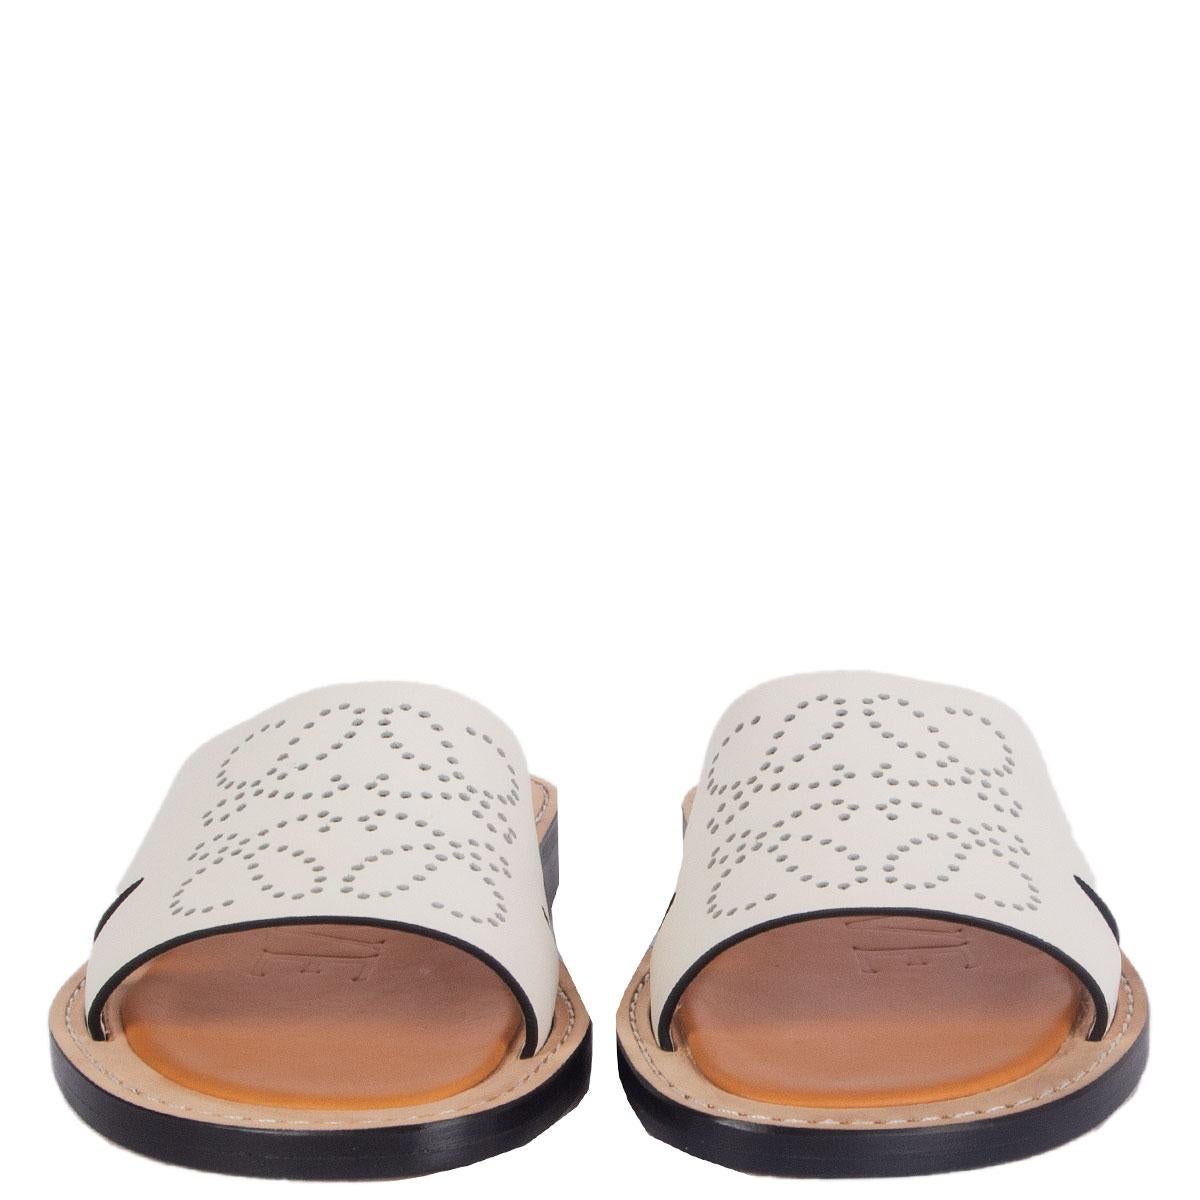 100% authentic Loewe Perforated Anagram mule flats in off-white leather and a beige leather sole. Brand new. Come with dust bag. 

Measurements
Imprinted Size	37
Shoe Size	37
Inside Sole	24cm (9.4in)
Width	8cm (3.1in)
Heel	2cm (0.8in)

All our